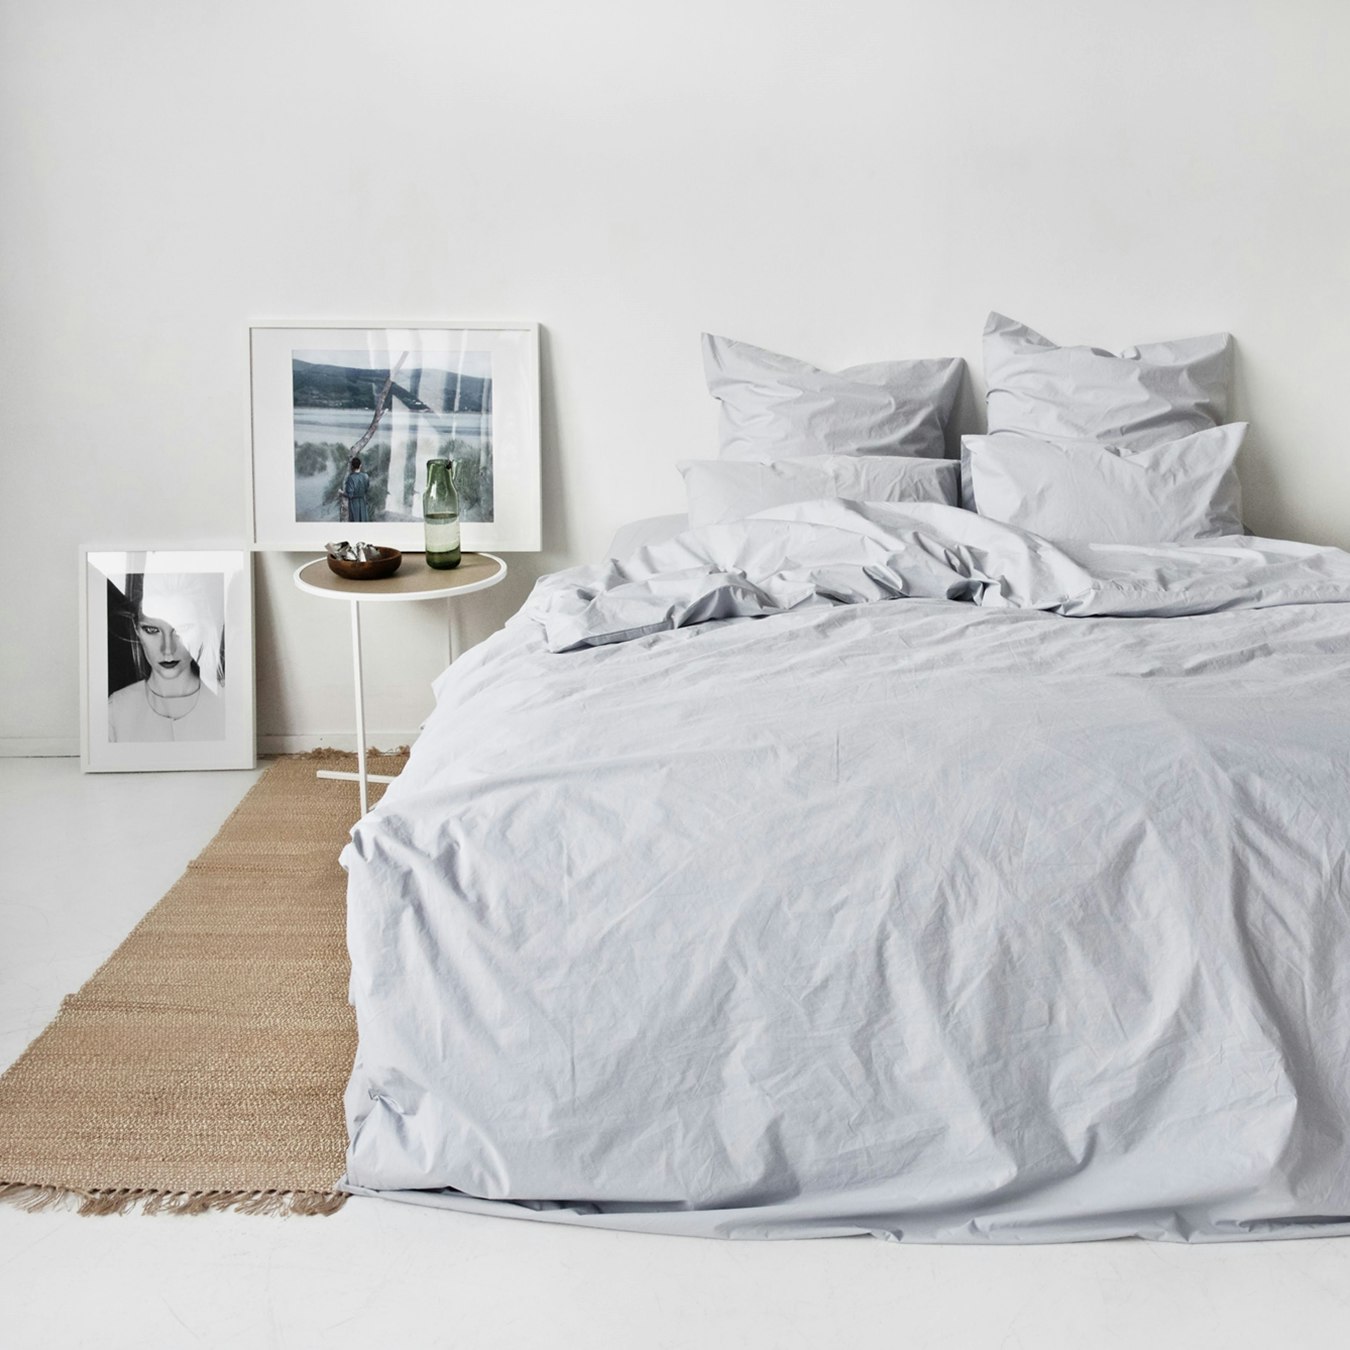 Double Percale Duvet Set Duvet Cover 2 Pillow Cases Light Grey By Bedroommood Fy